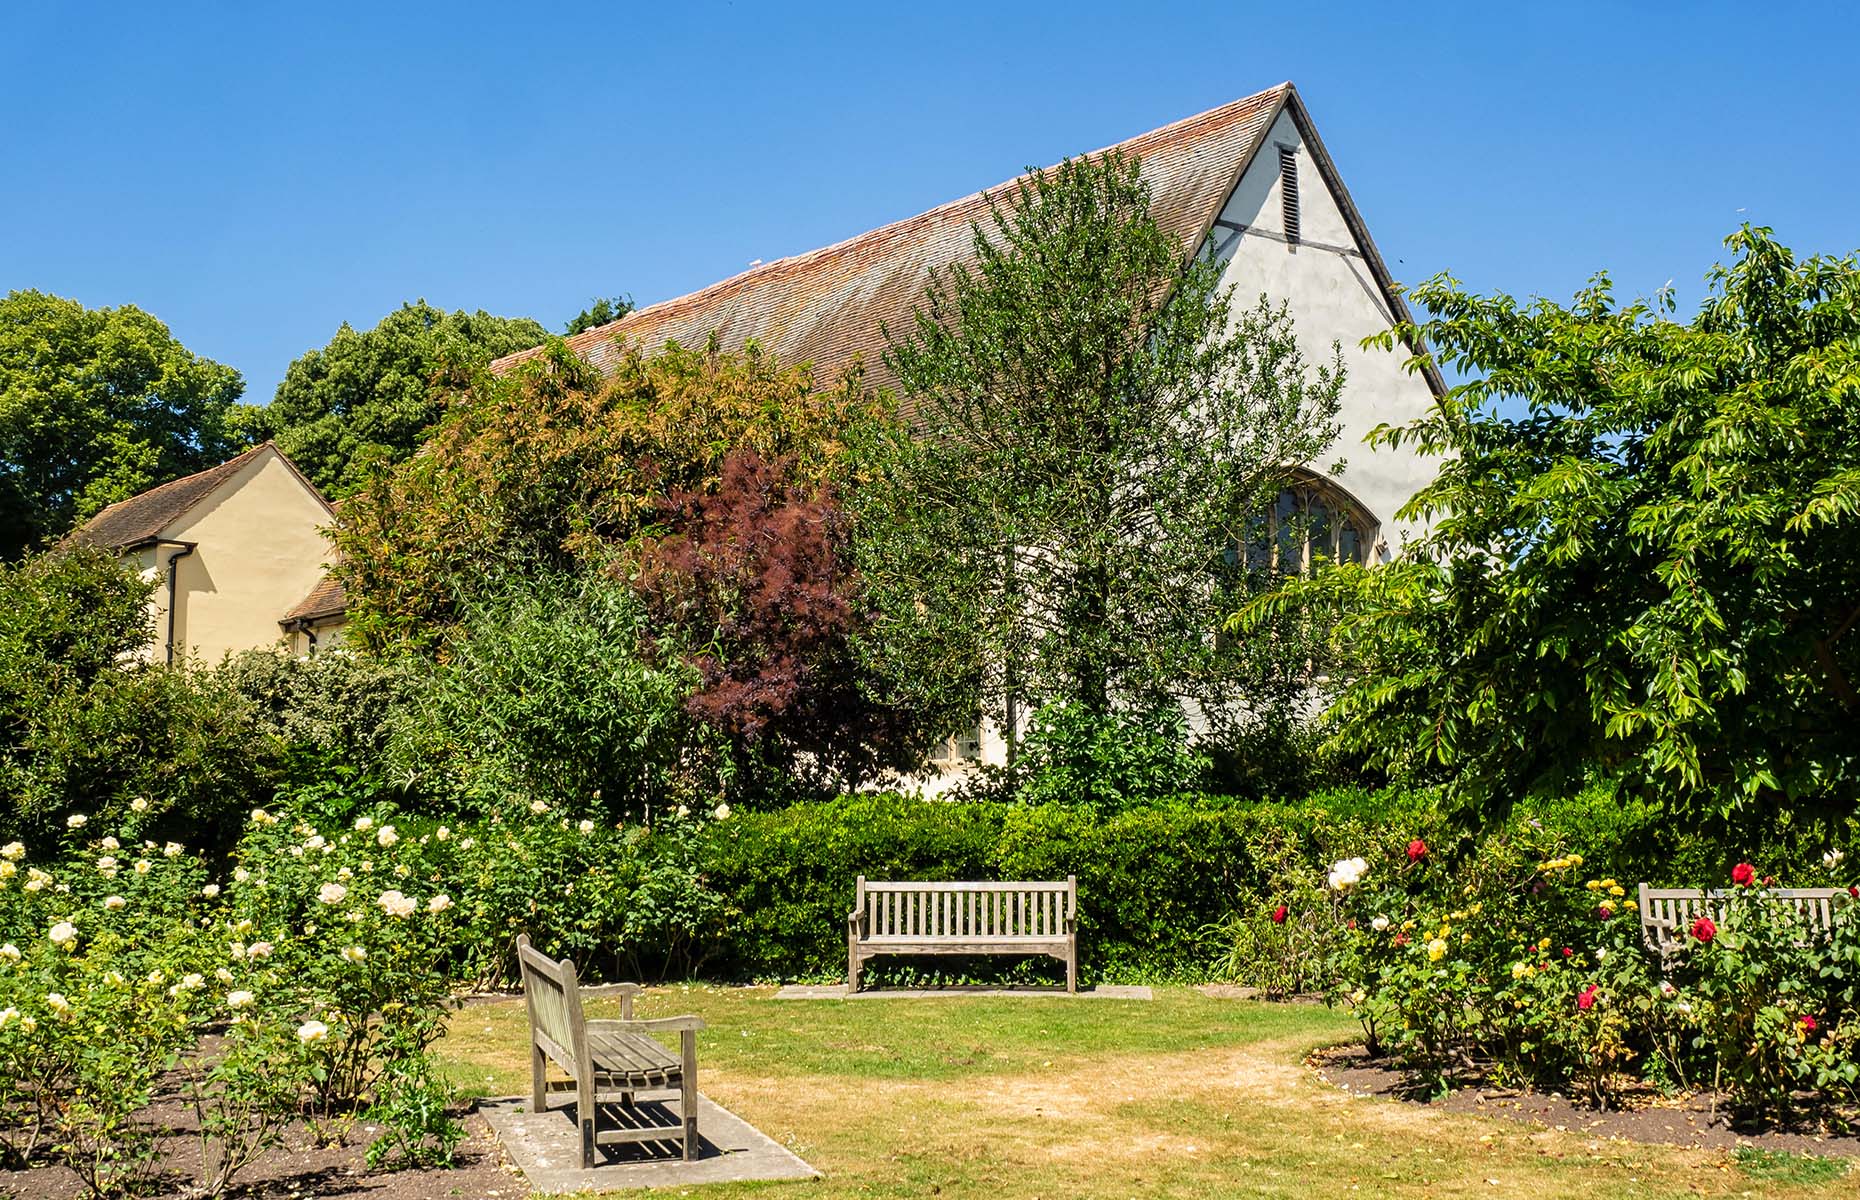 Prittlewell Priory in Southend (Image: Chris Lawrence/Alamy Stock Photo)